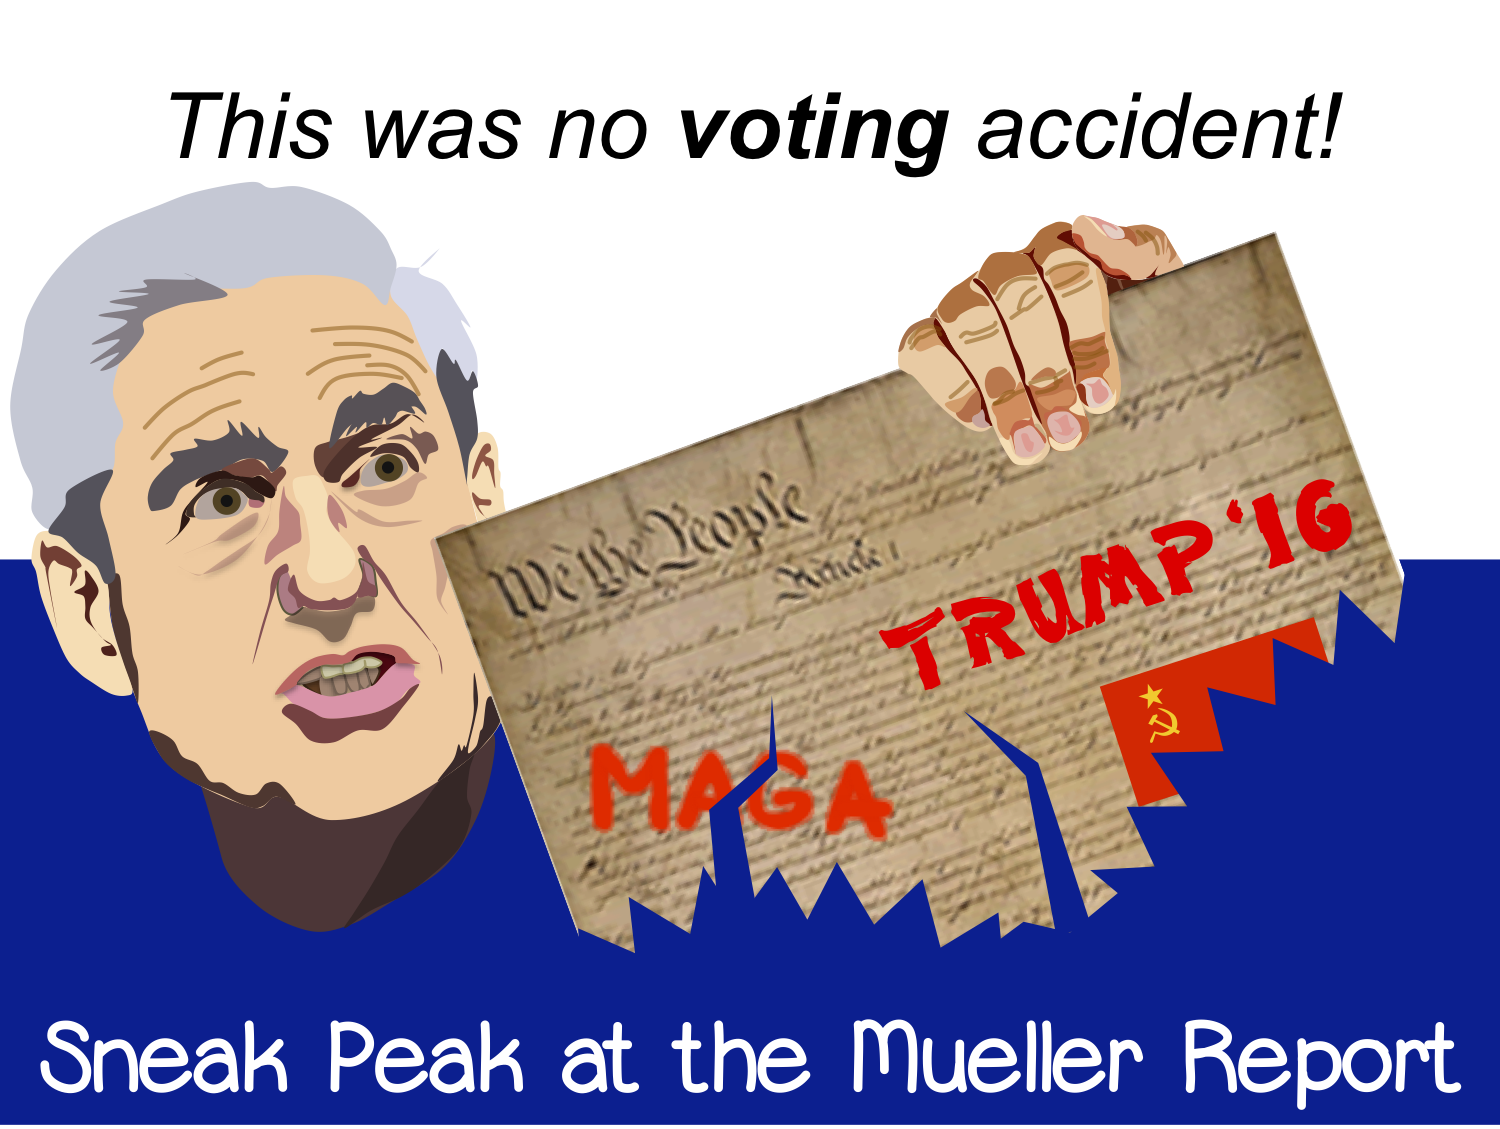 Mueller Report - This was no voting accident!